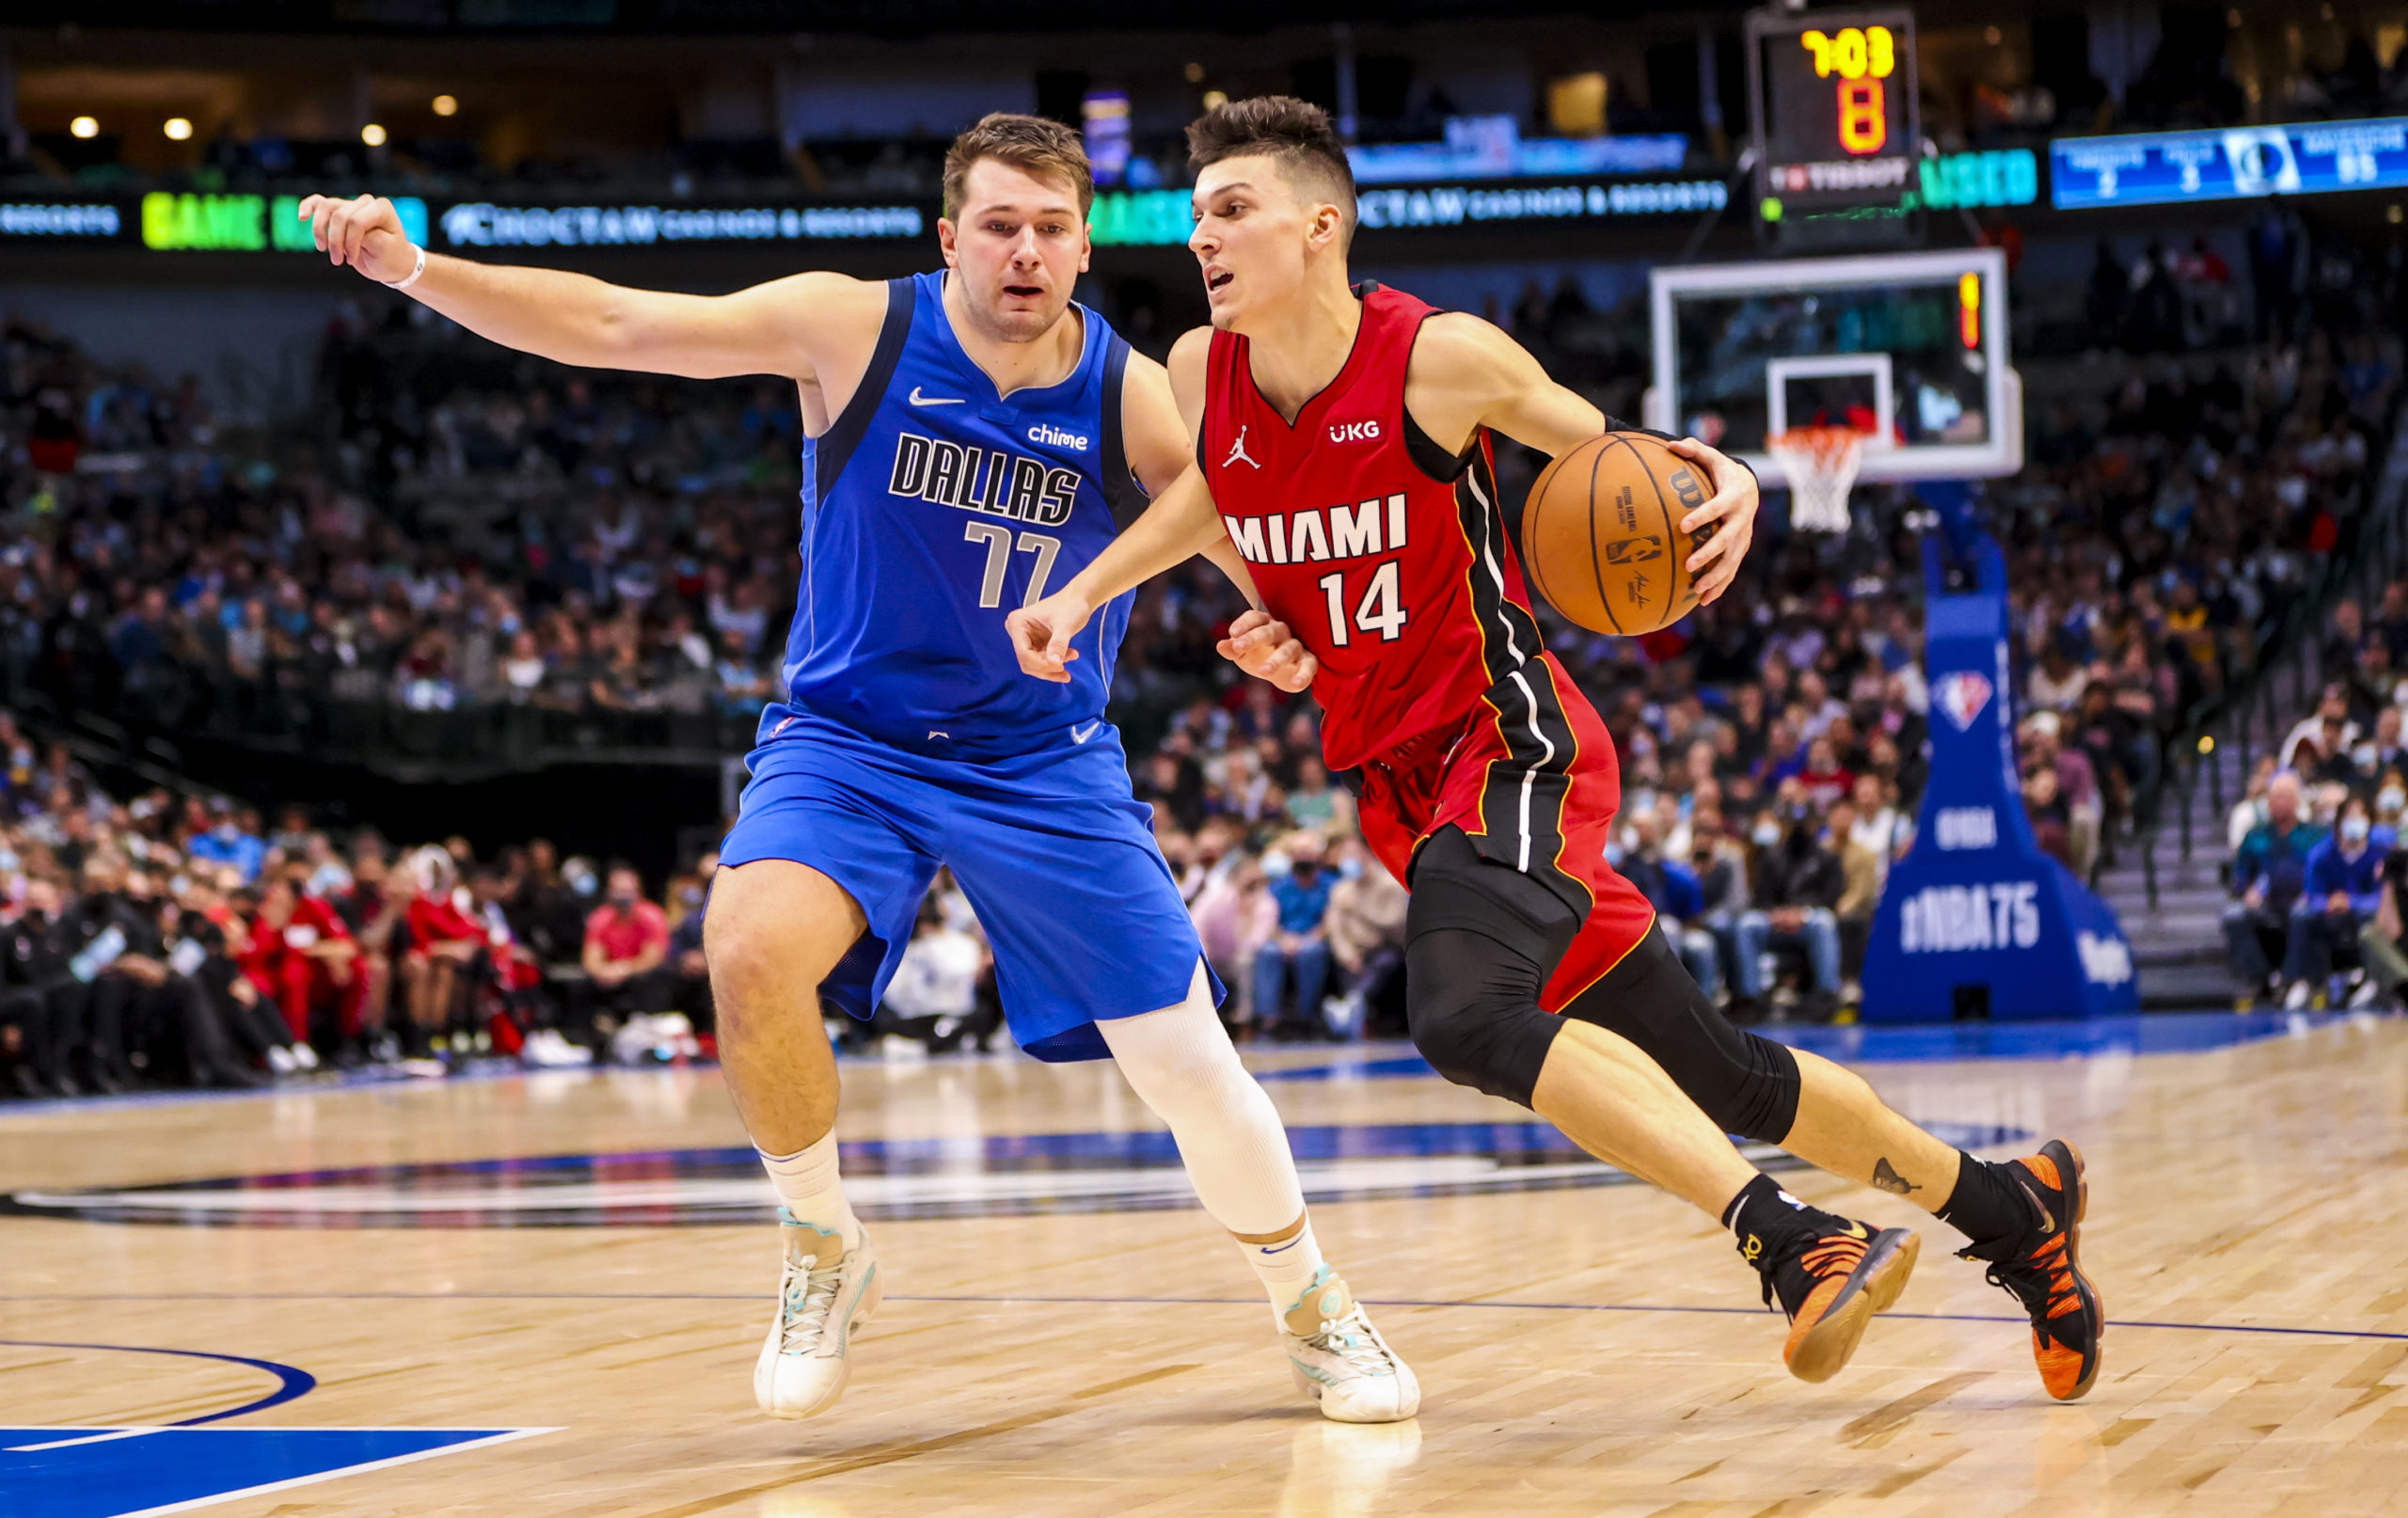 Miami Heat guard Tyler Herro (14) drives to the basket as Dallas Mavericks guard Luka Doncic (77) defends during the fourth quarter at American Airlines 